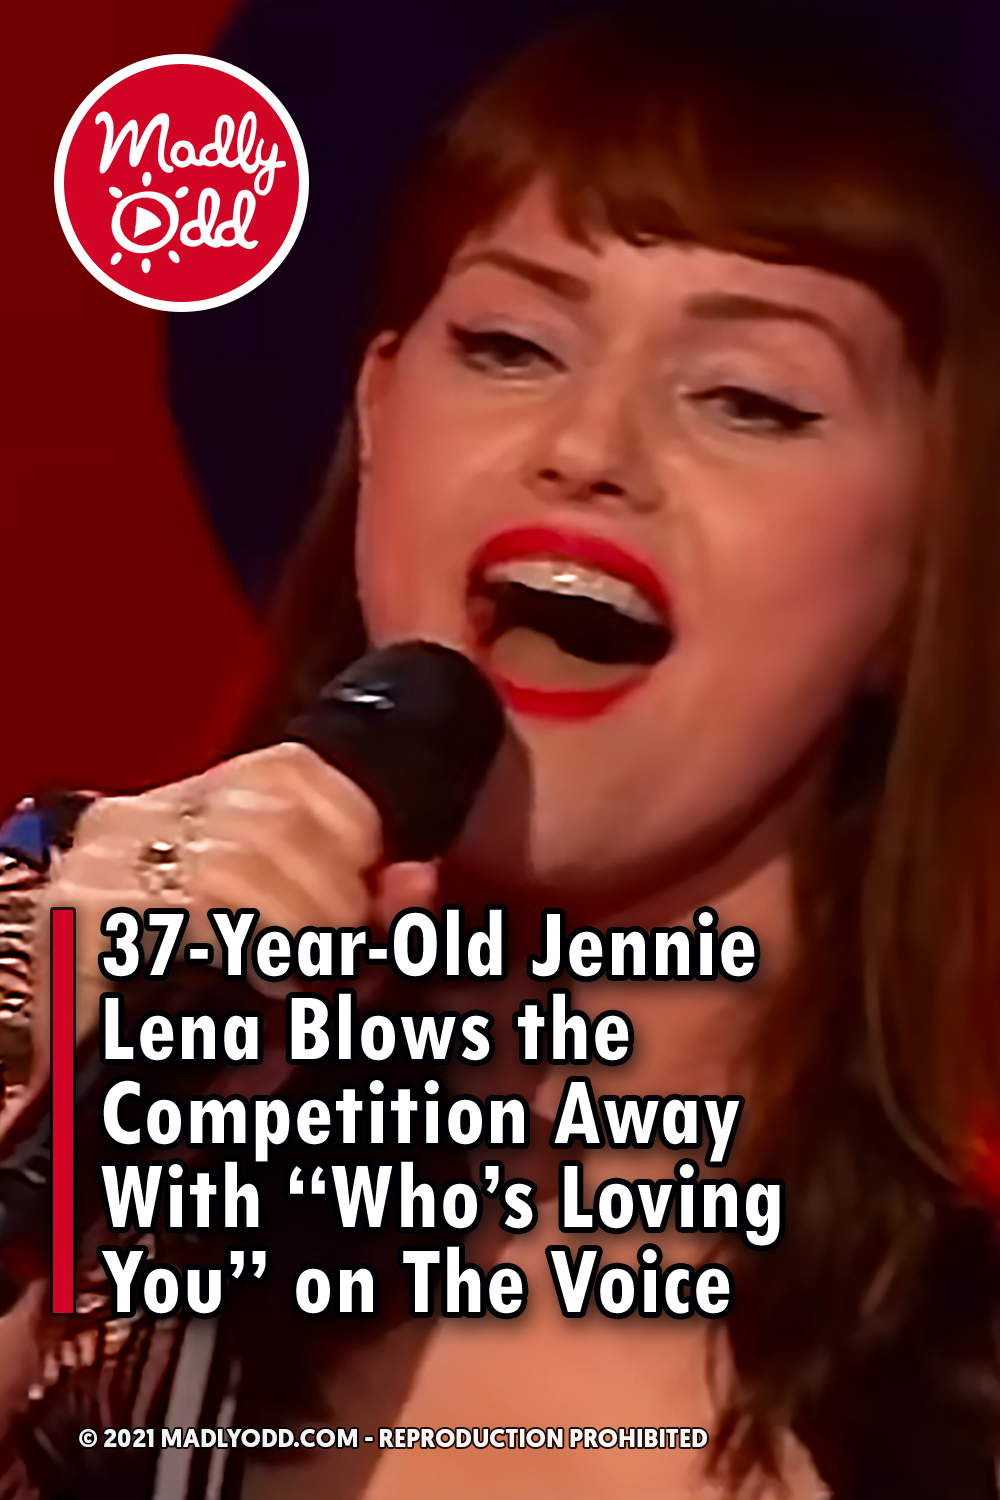 37-Year-Old Jennie Lena Blows the Competition Away With “Who’s Loving You” on The Voice